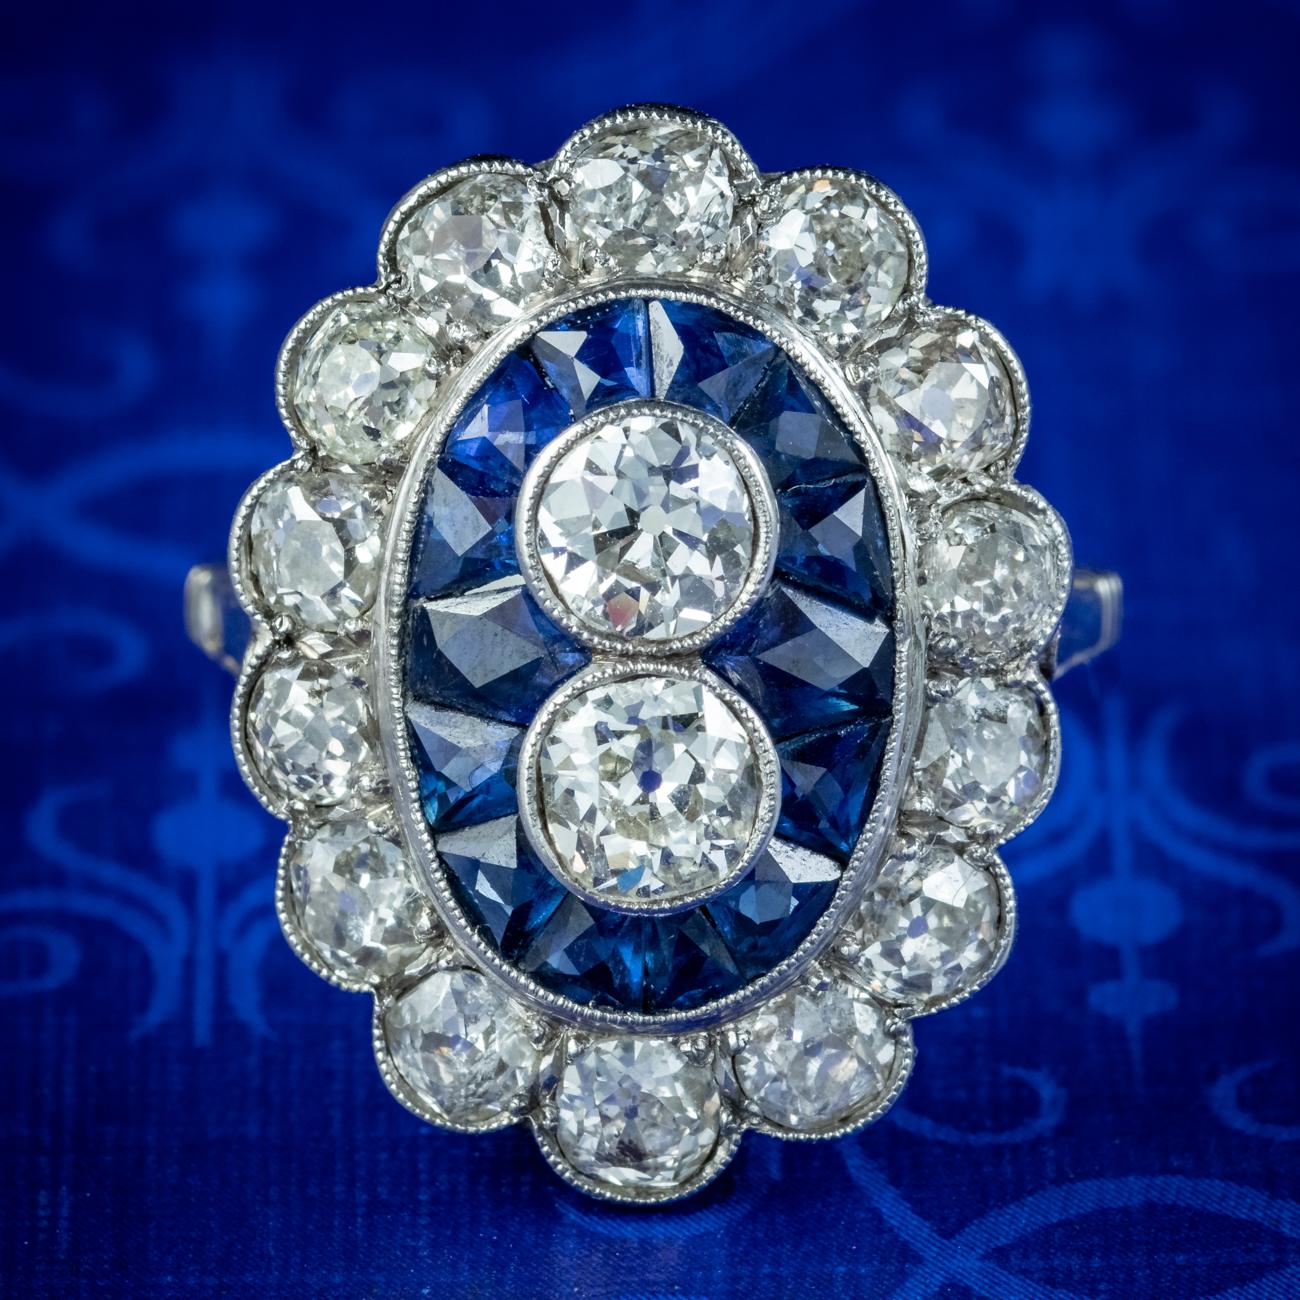 A magnificent Art Deco cluster ring made in France in the 1920s. It features twin old European cut diamonds set in the centre, framed in a border of calibre set, French cut sapphires and fourteen old cut diamonds.

The sapphires total to approx.